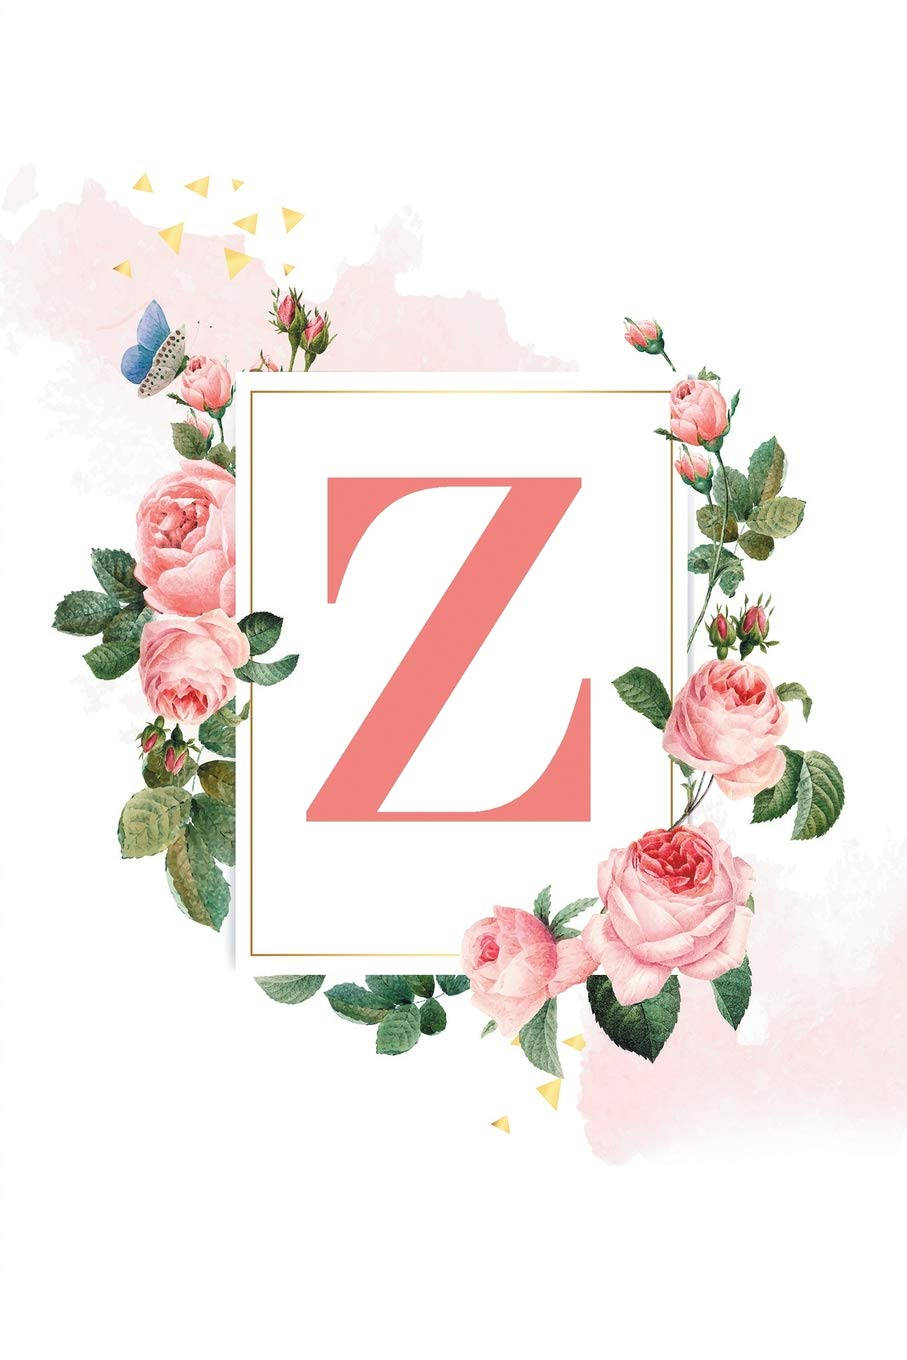 Elegance In Lettering: The Letter Z Adorned With Vibrant Pink Flowers Background